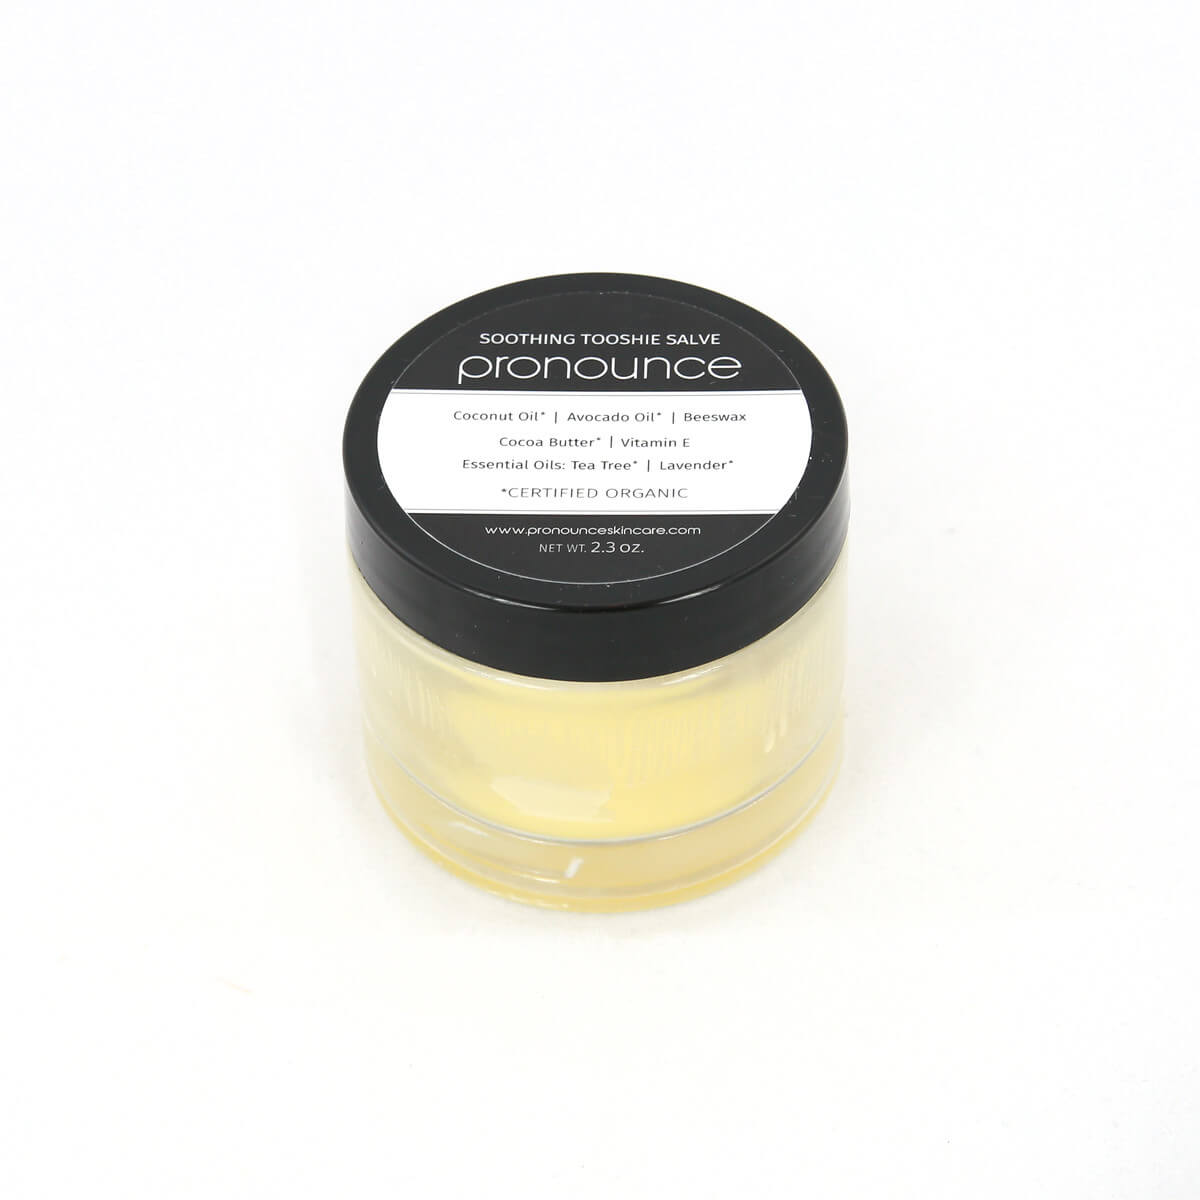 Soothing Tooshie Salve 2.3oz Pronounce Skincare & Herbal Boutique